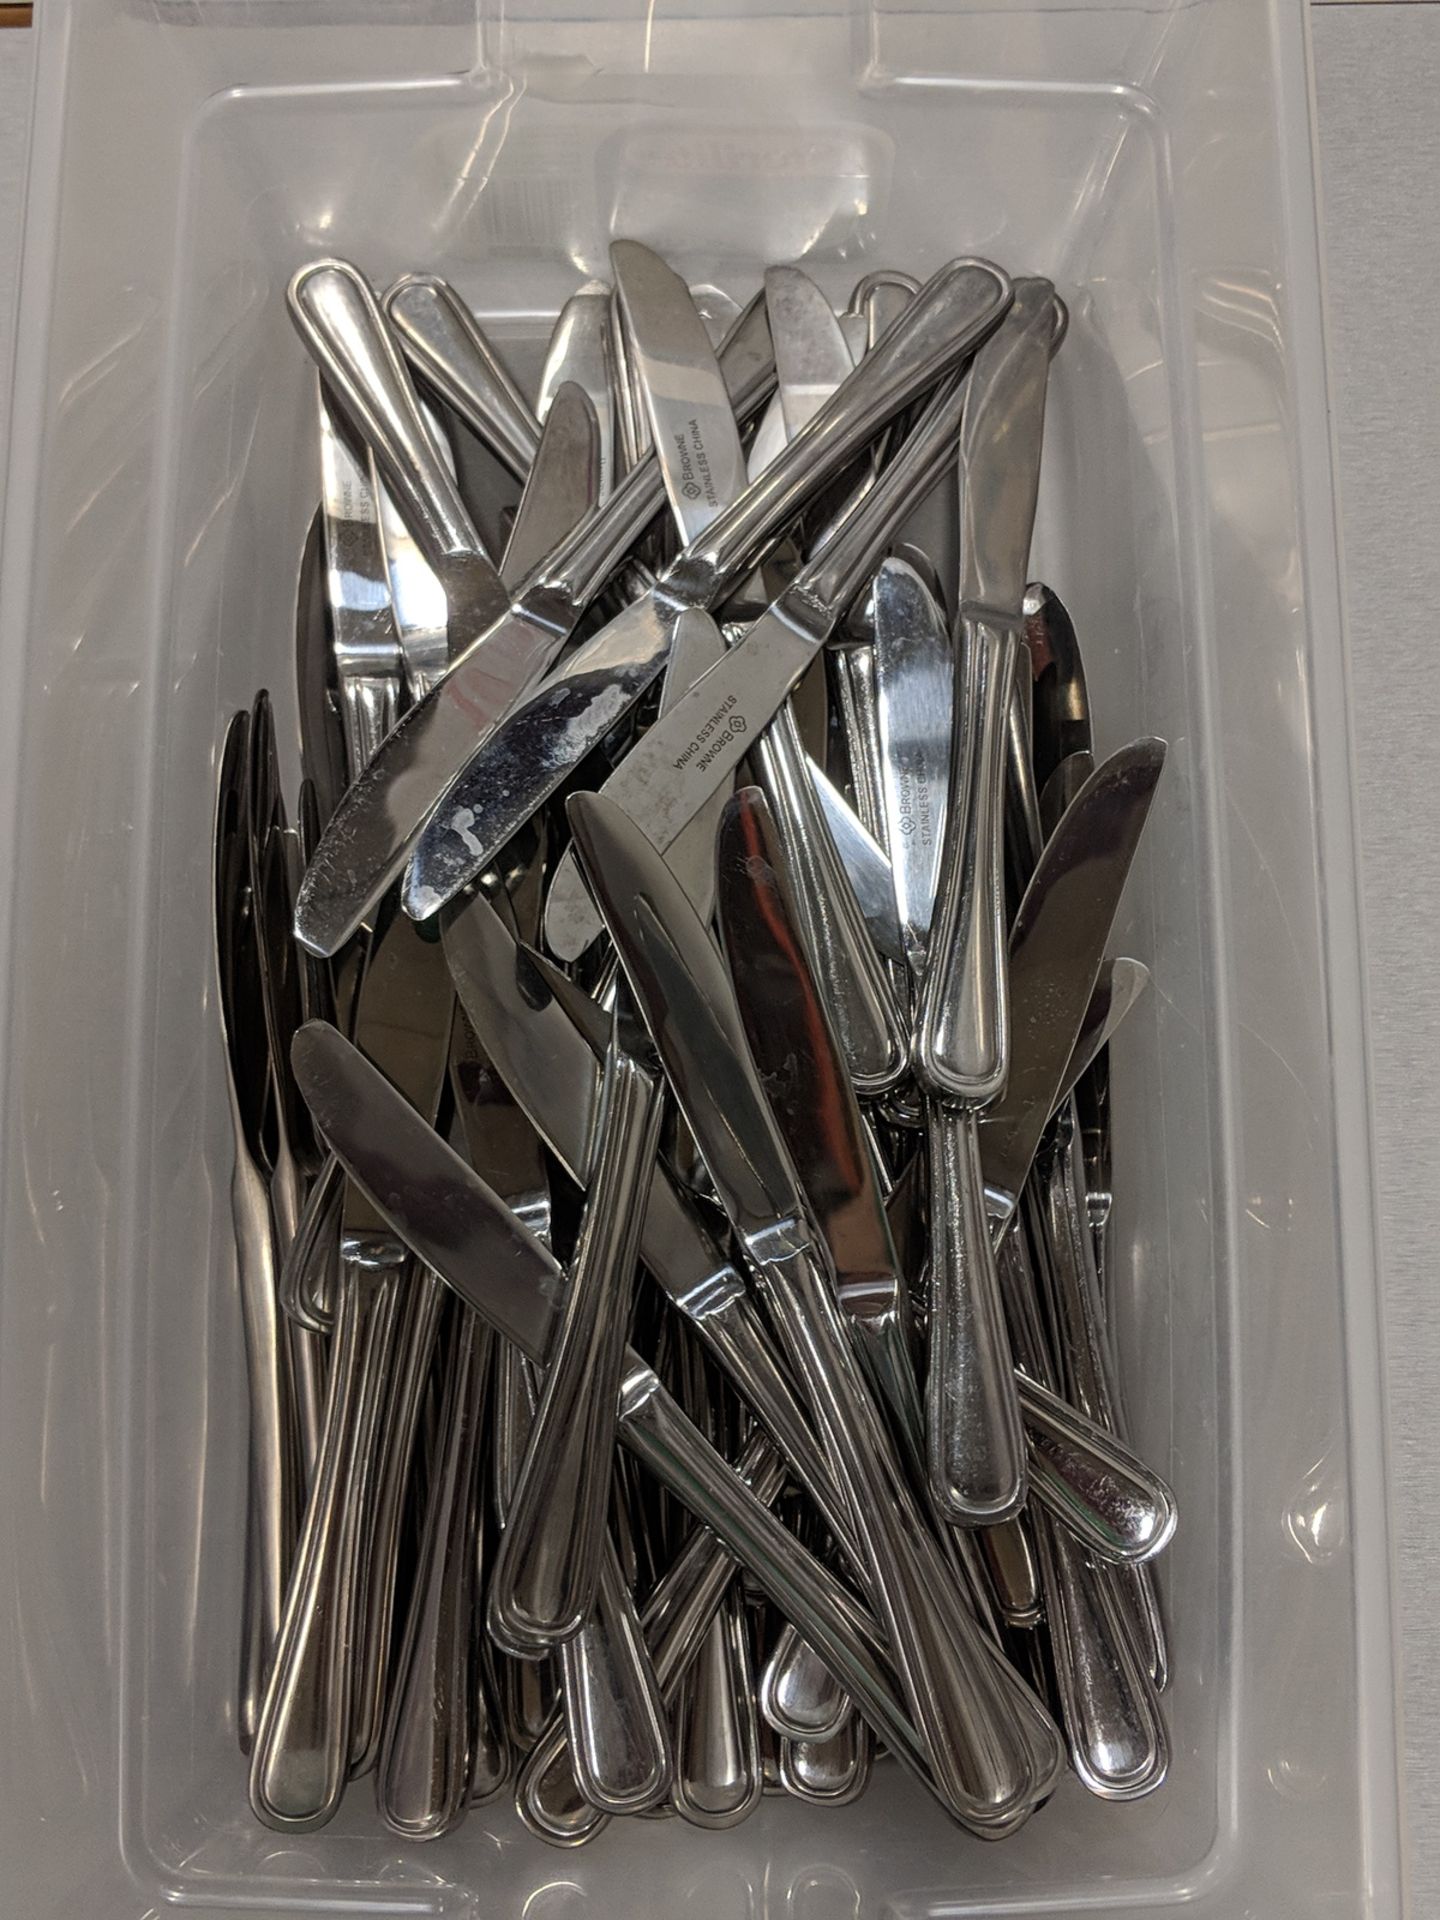 Browne Butter Knives - Lot of 72